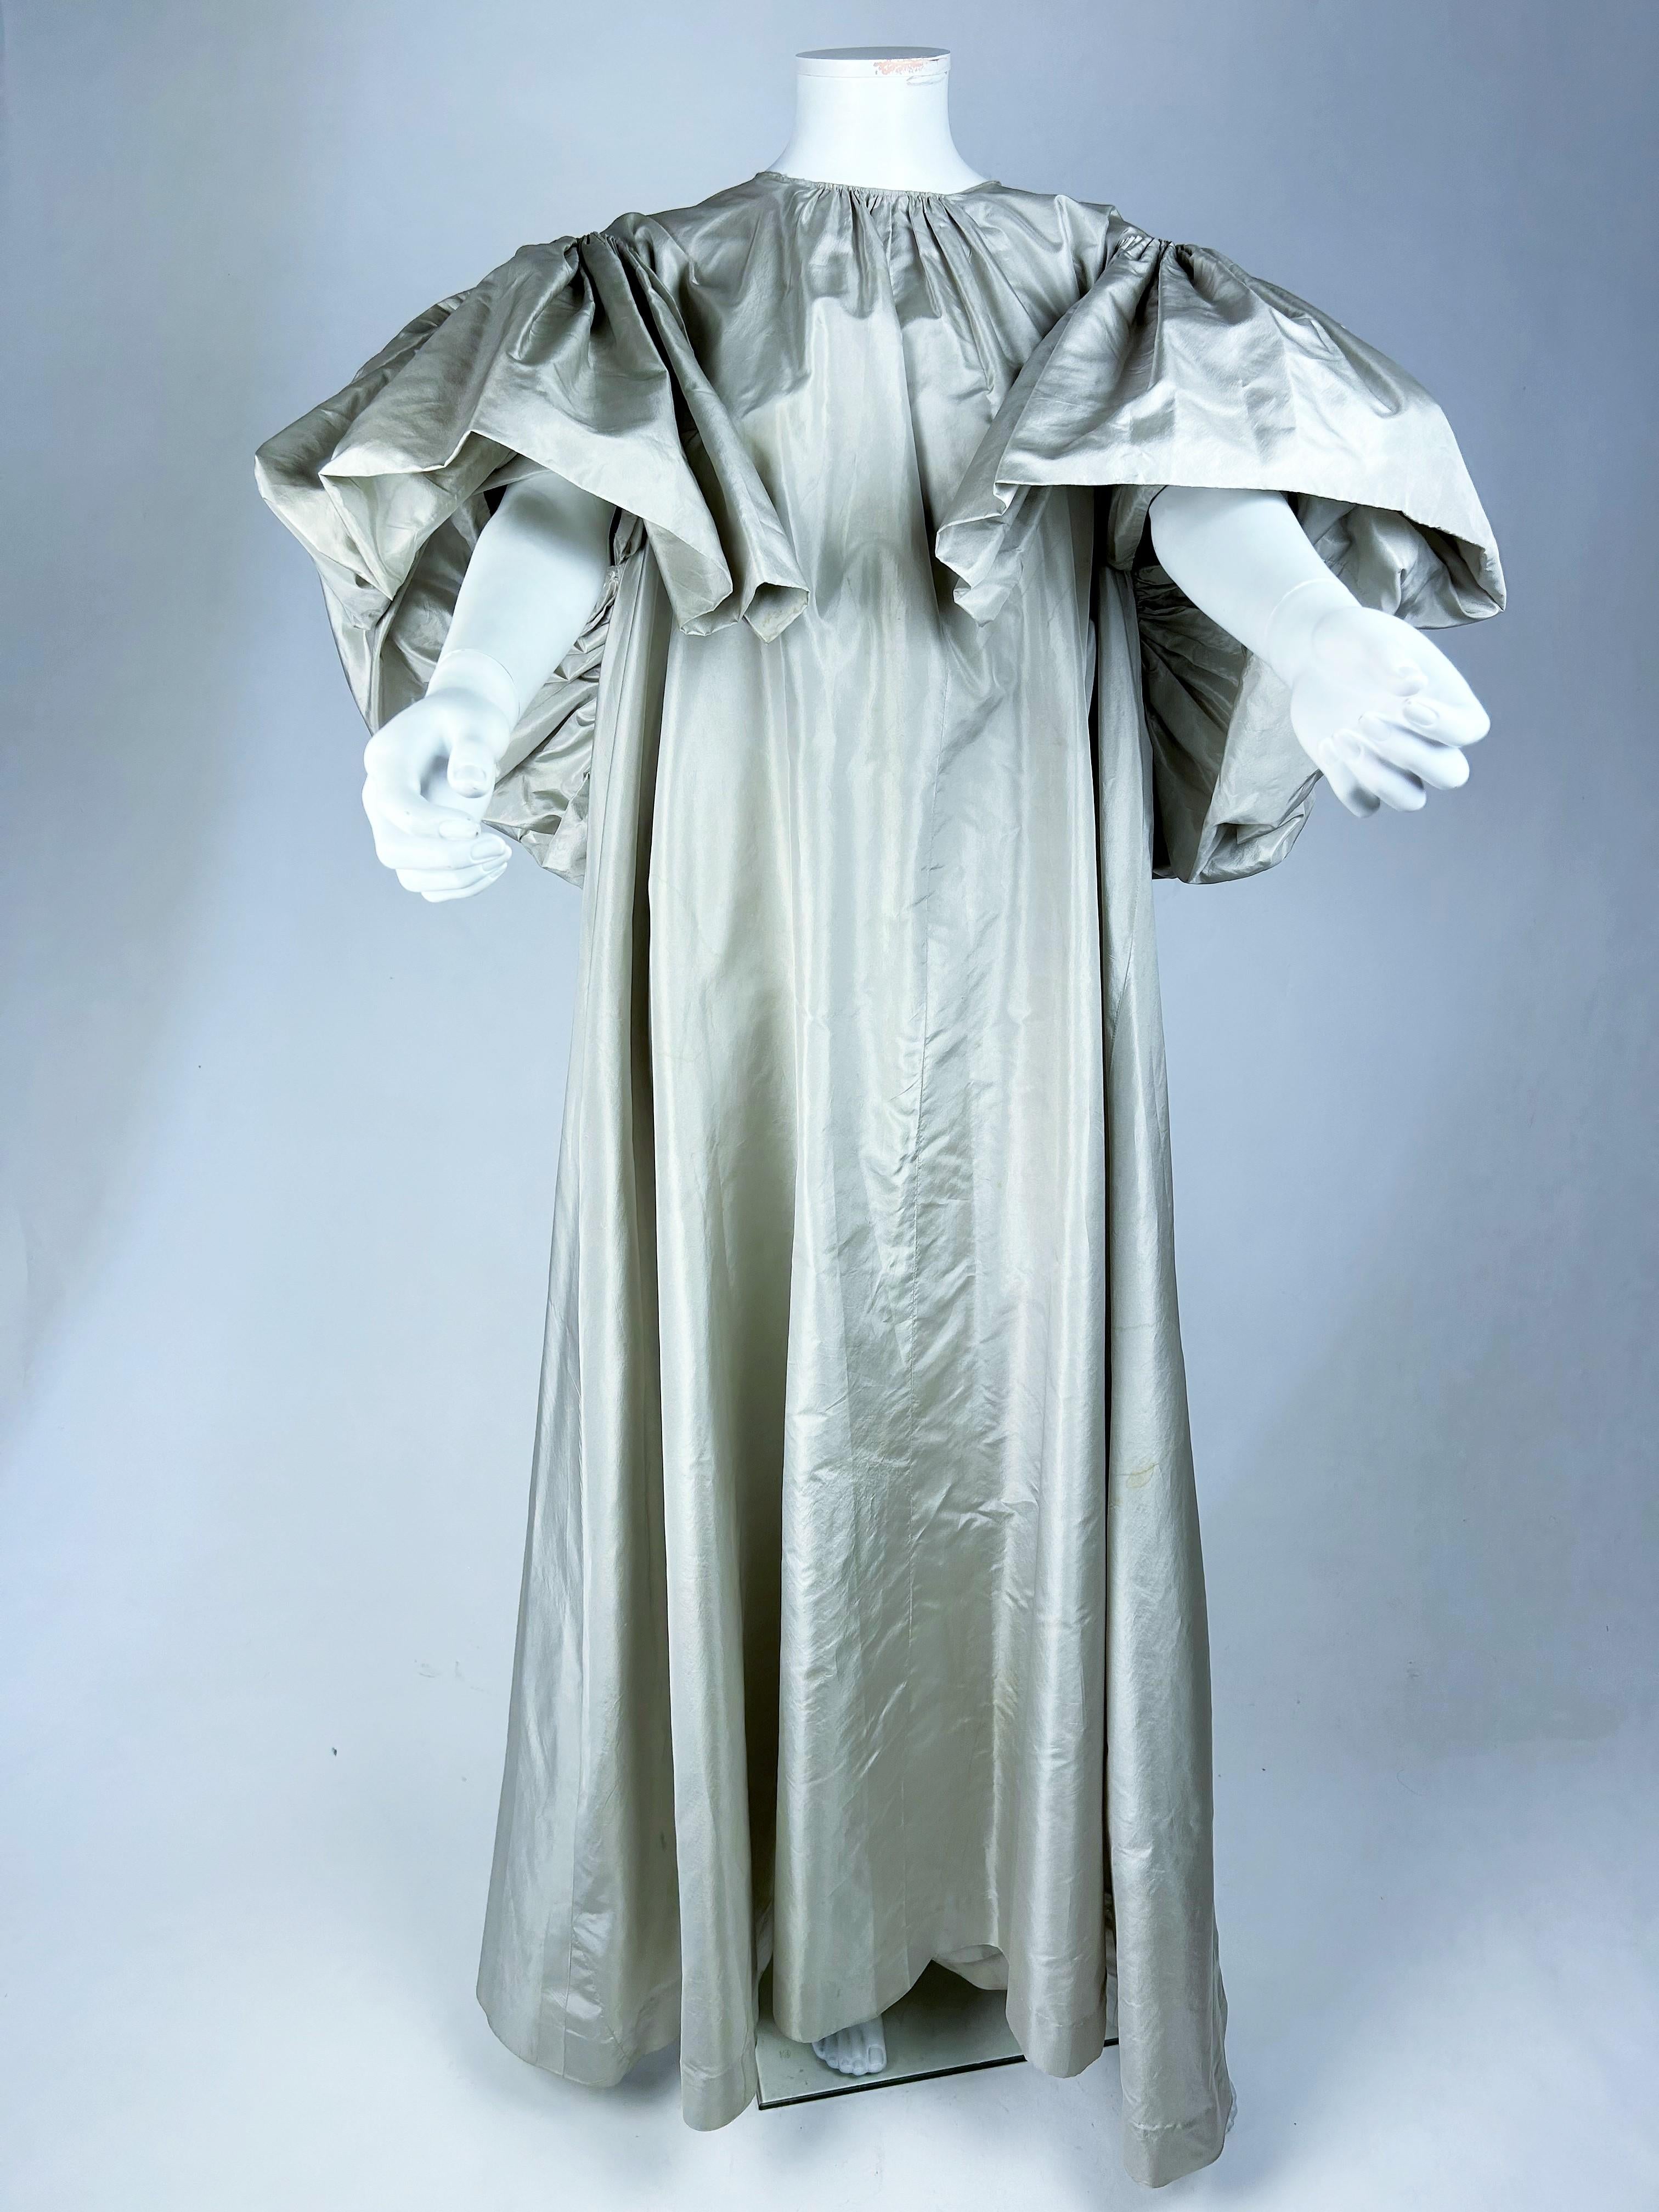 A Taffeta dress by Madame Grès Haute Couture (attributed to) - Paris 1977 2